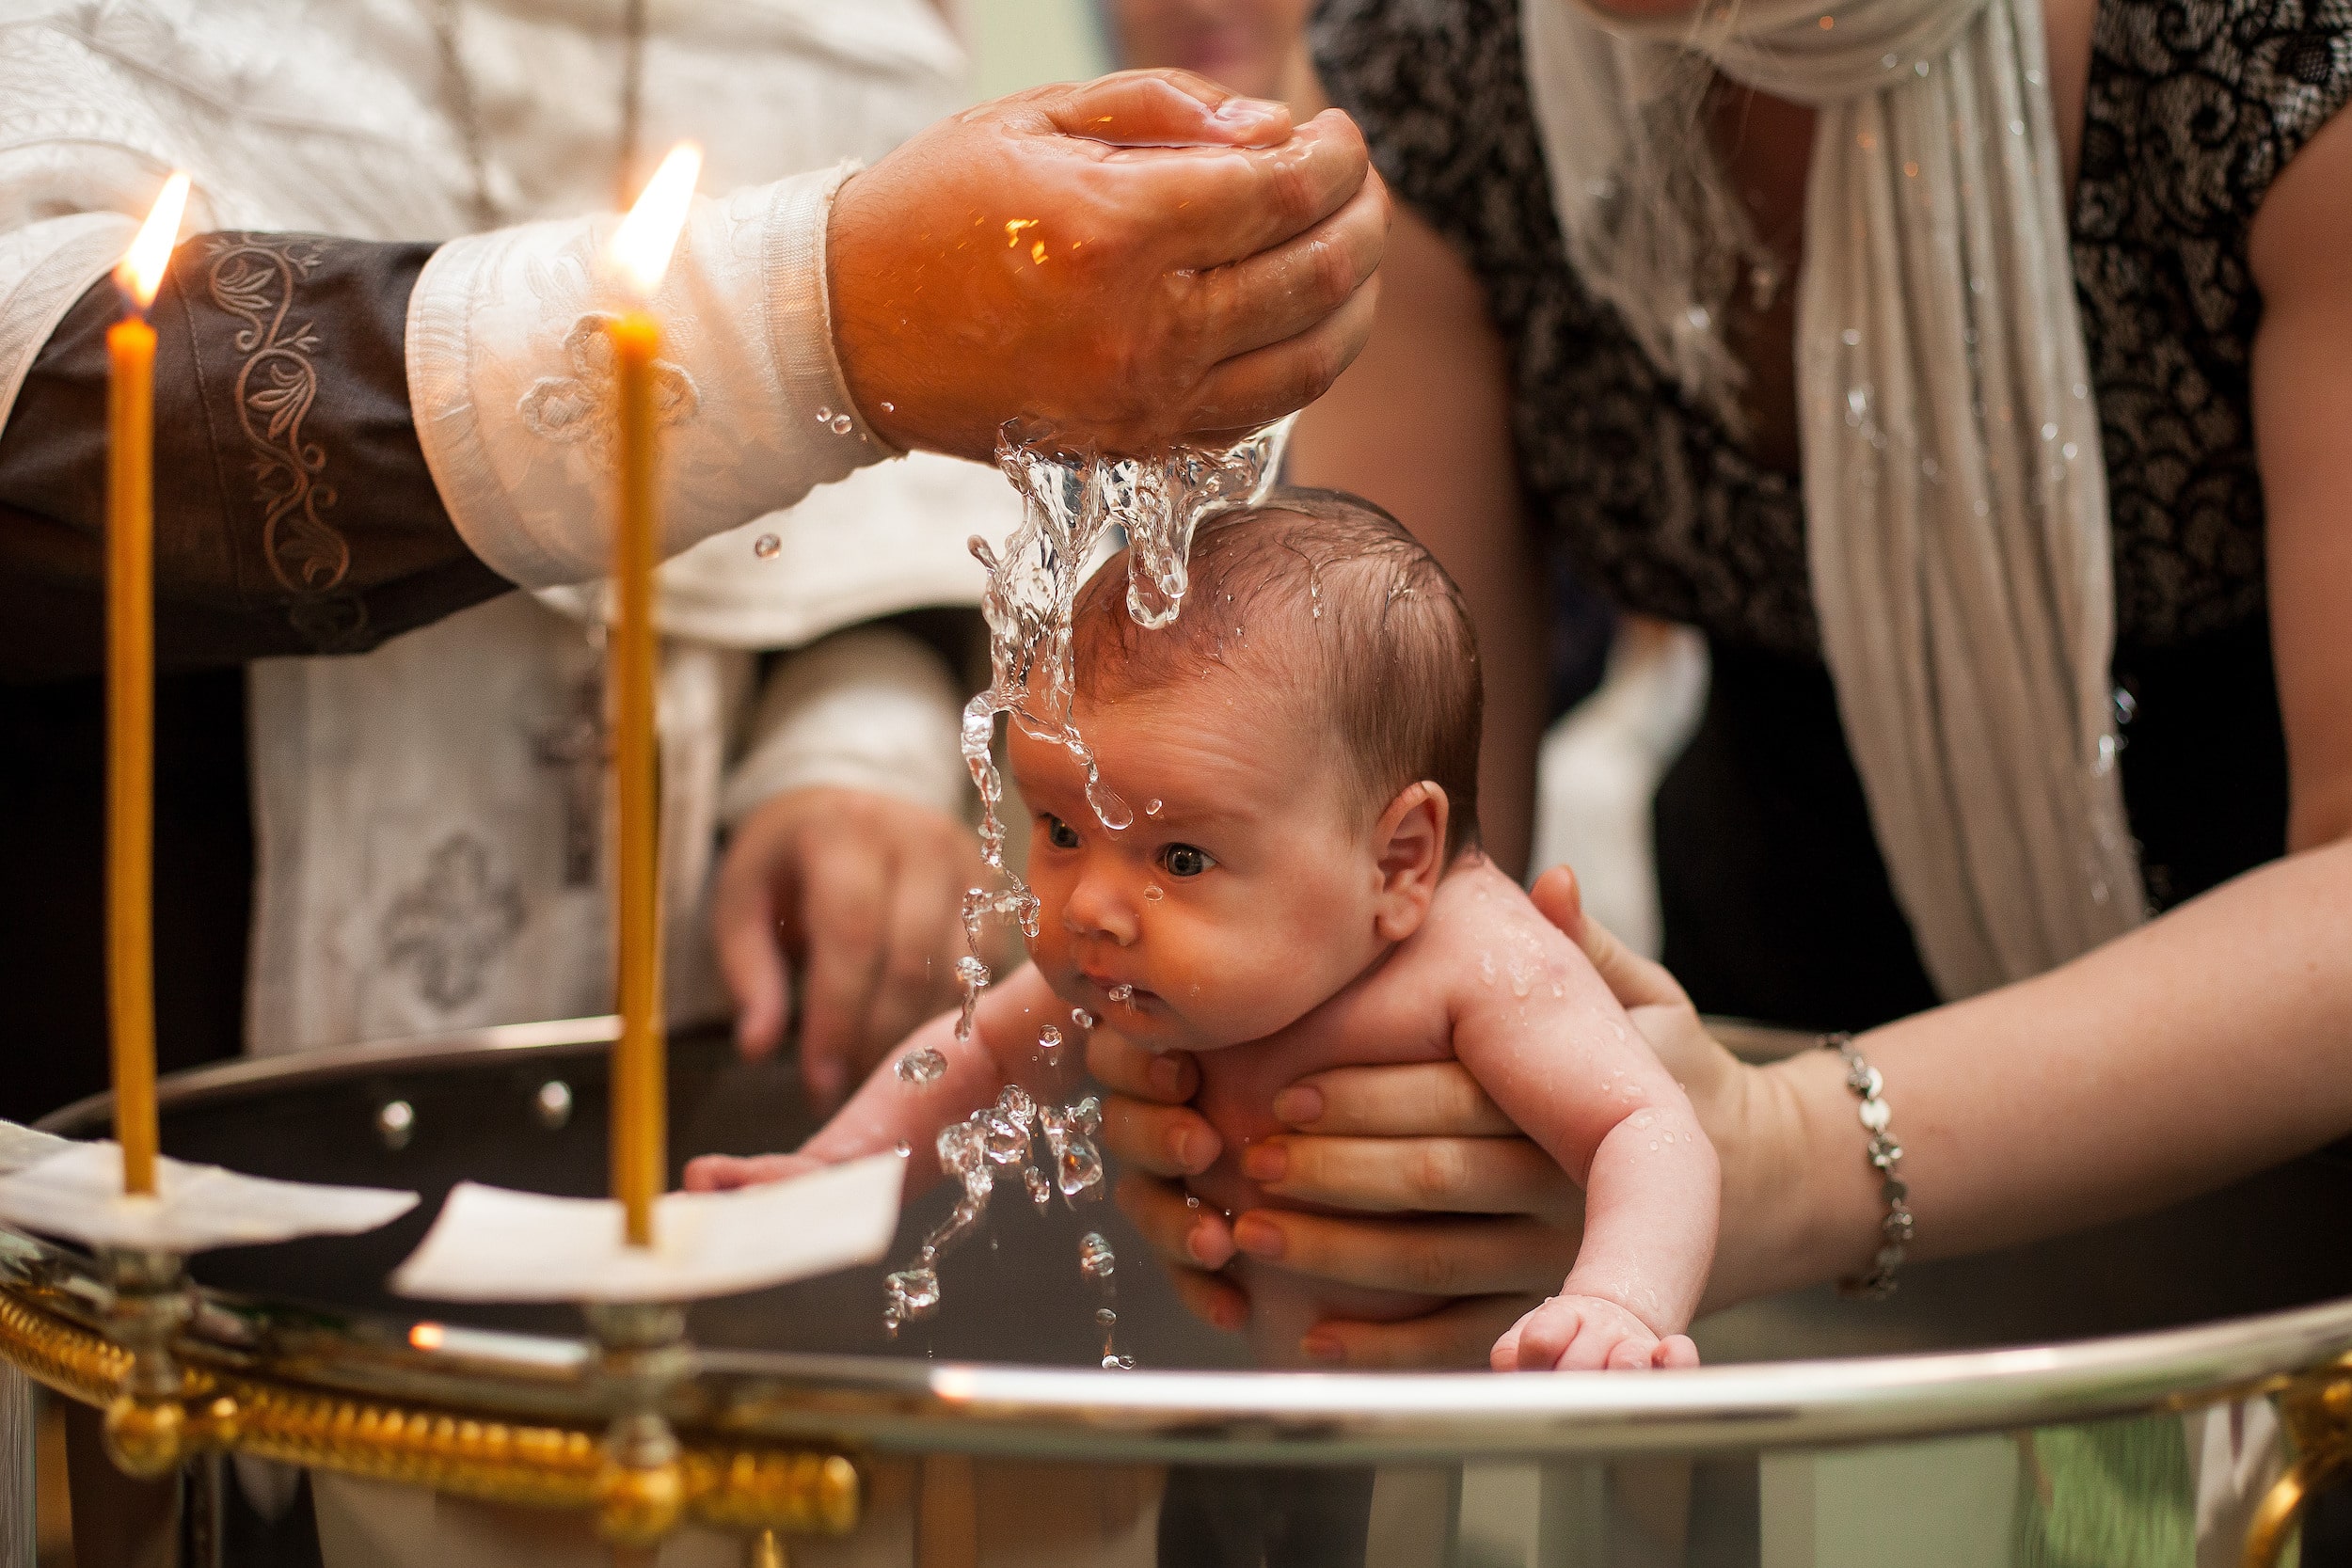 A BRIEF COMMENT ON INFANT BAPTISM TO MY BLOG